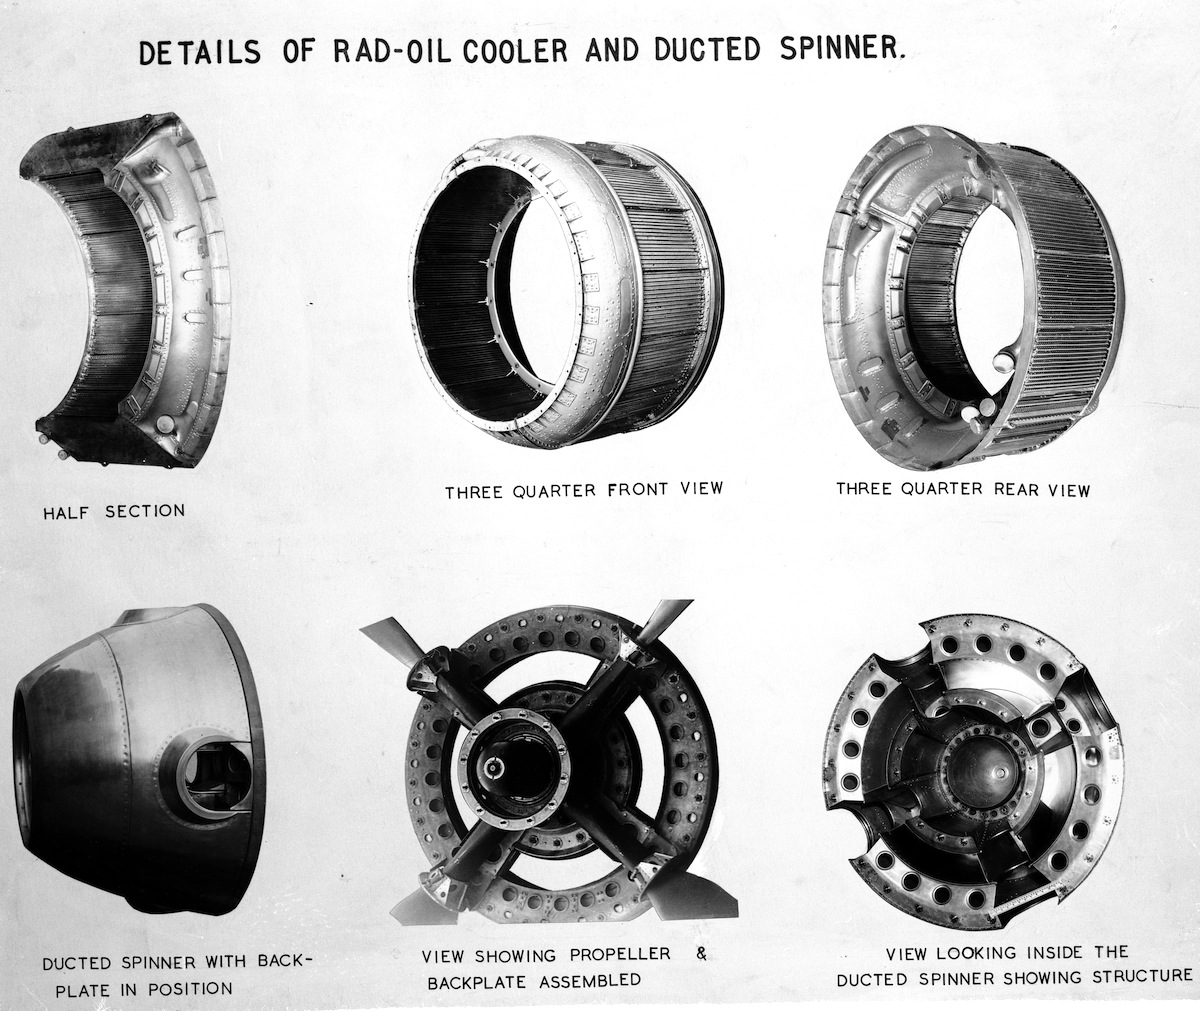 Diagram illustrating details of Hawker Tempest rad-oil cooler and ducted spinner